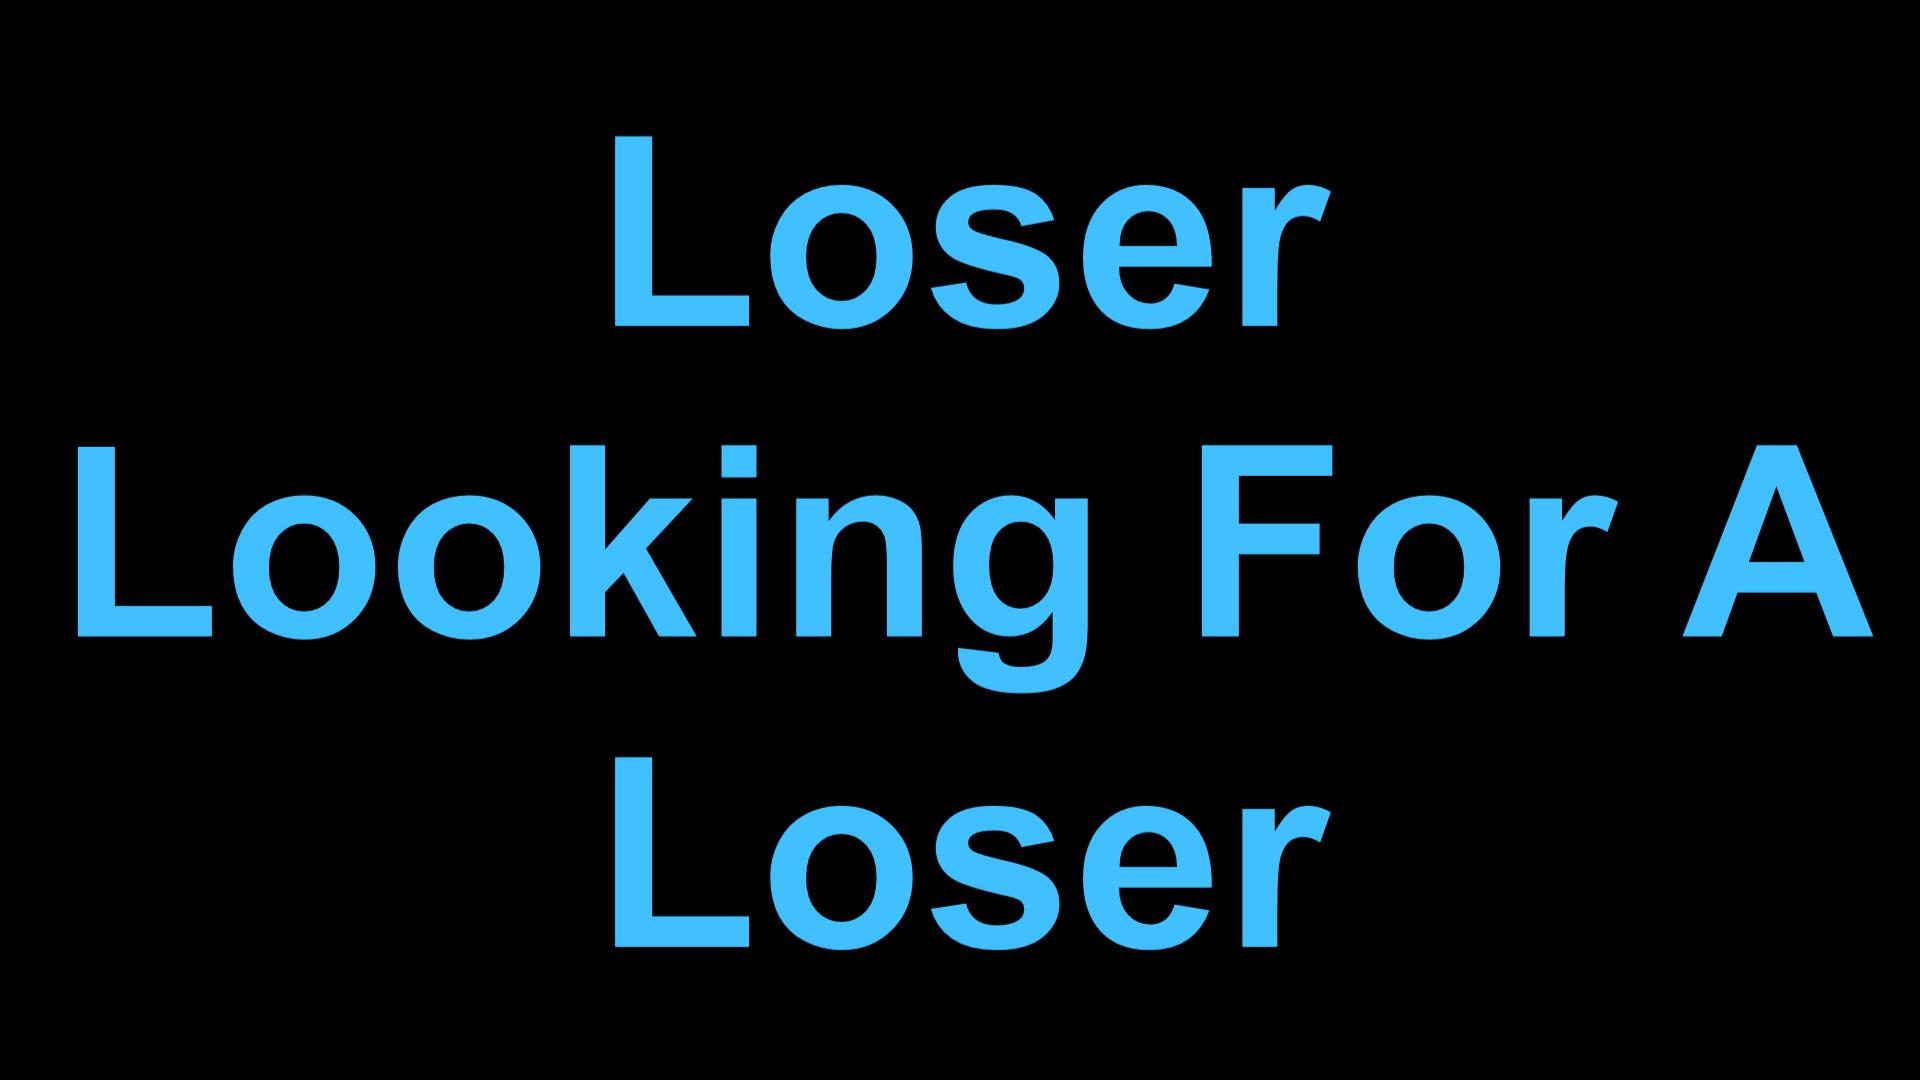 LOSER LOOKING FOR A LOSER